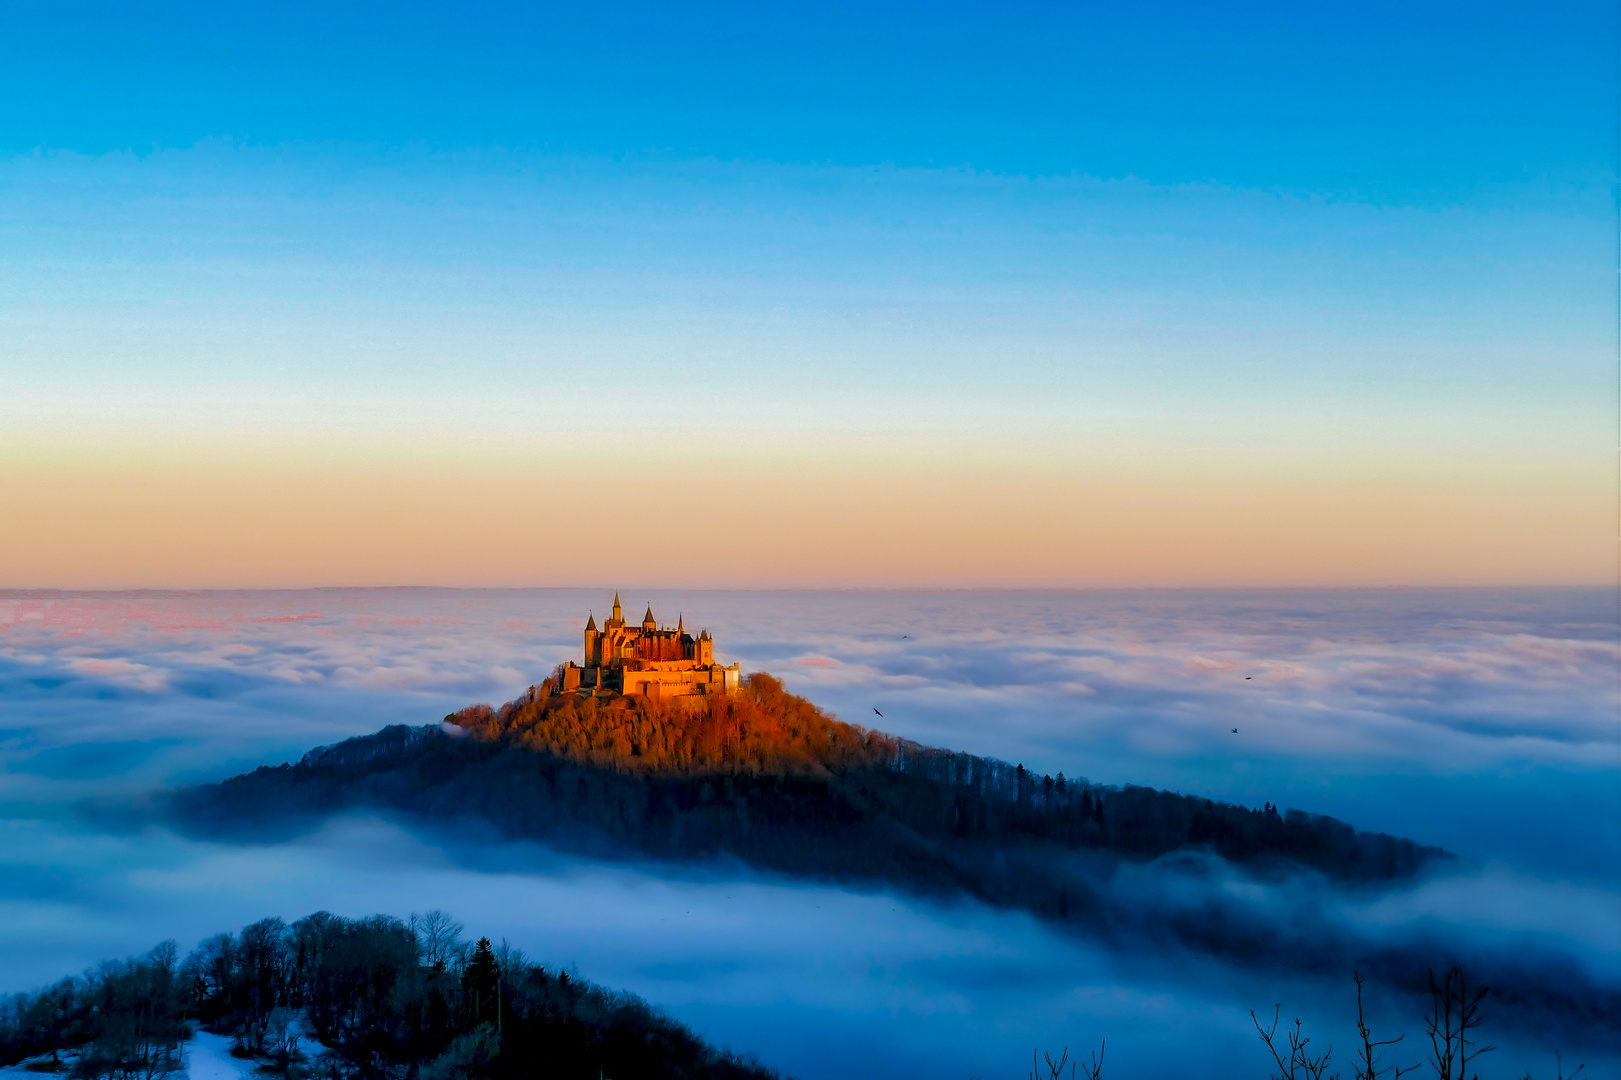  Burg Hohenzollern In the first Light  